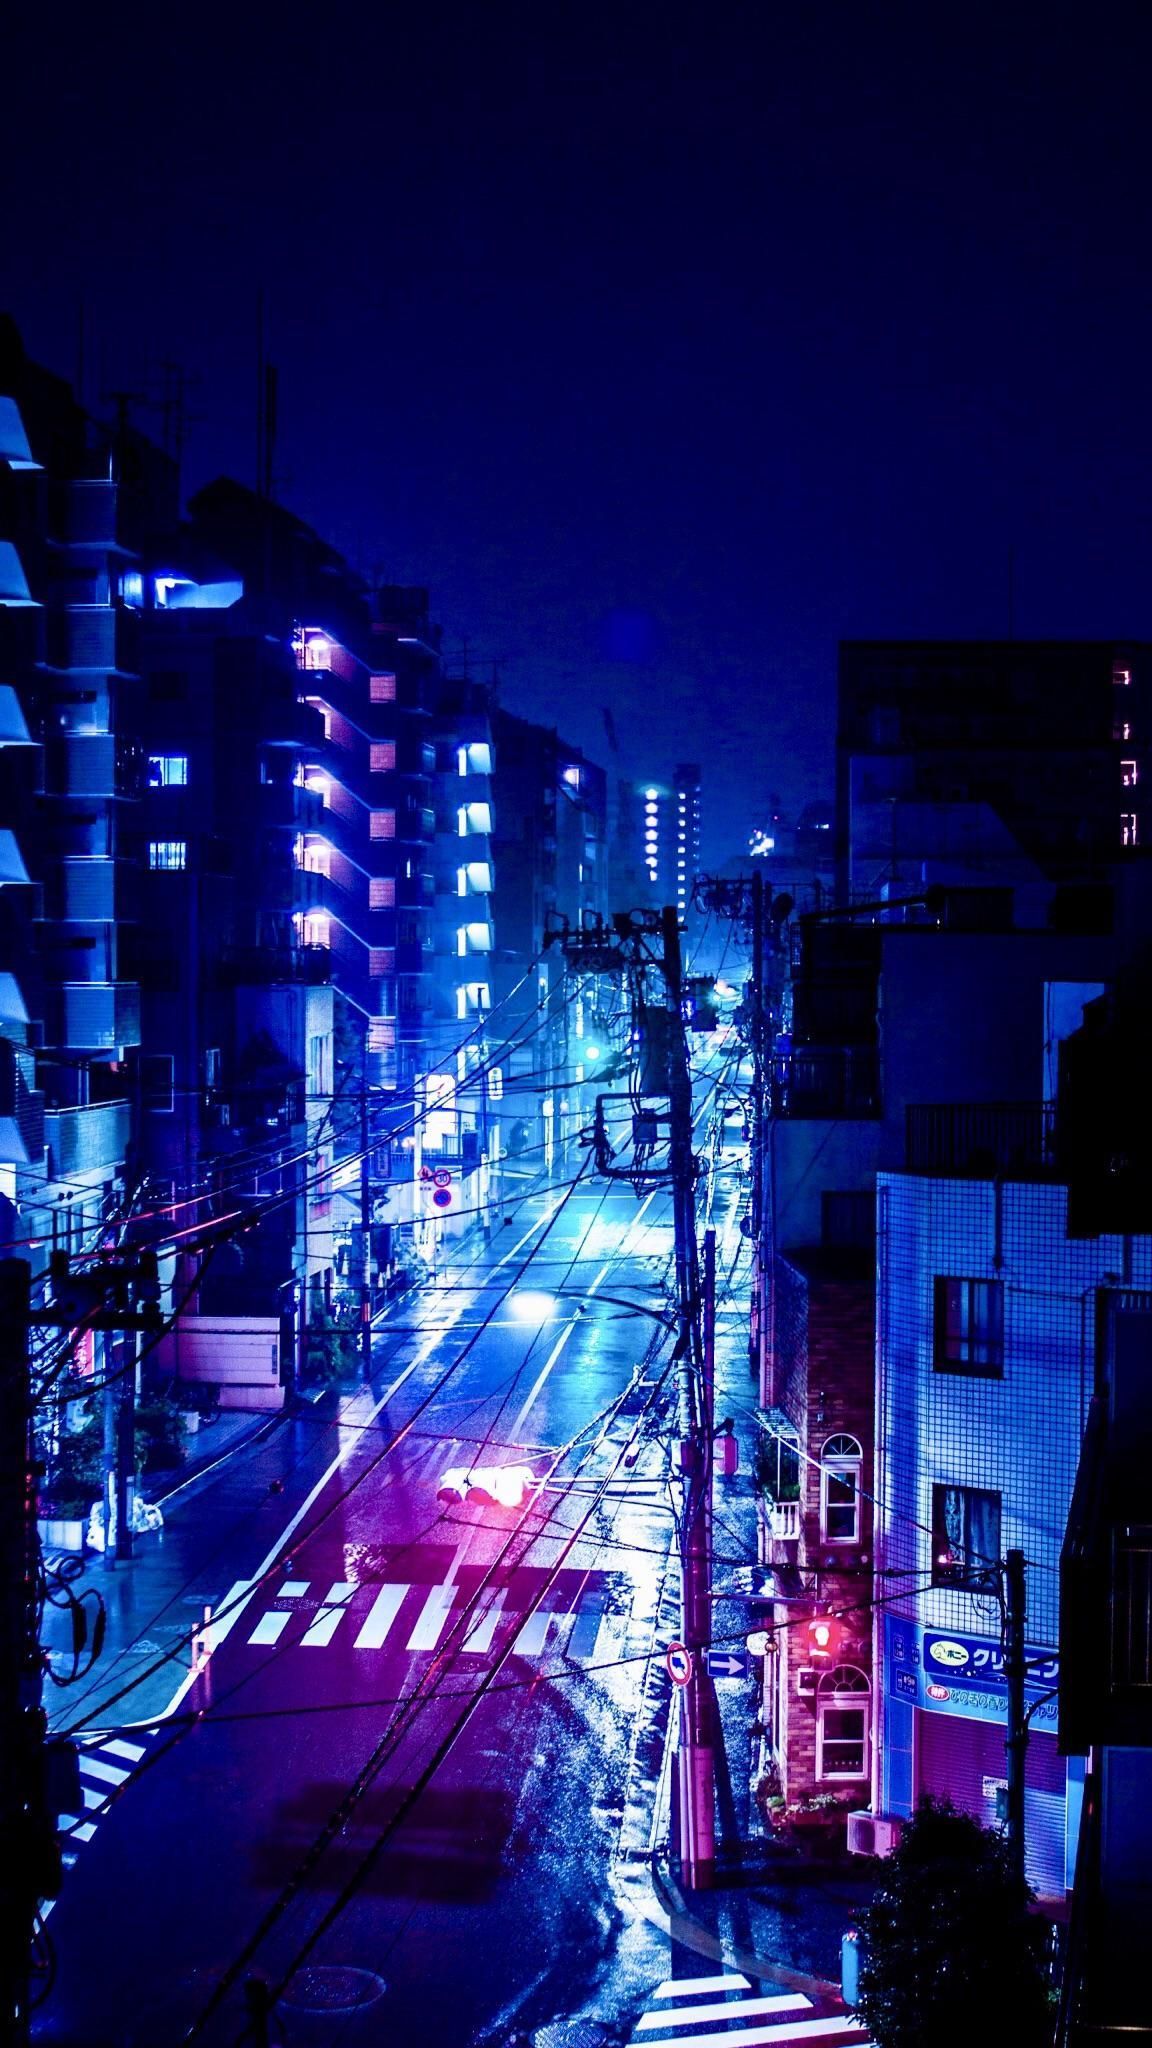 Aesthetic wallpaper for phone of a city street at night - Anime city